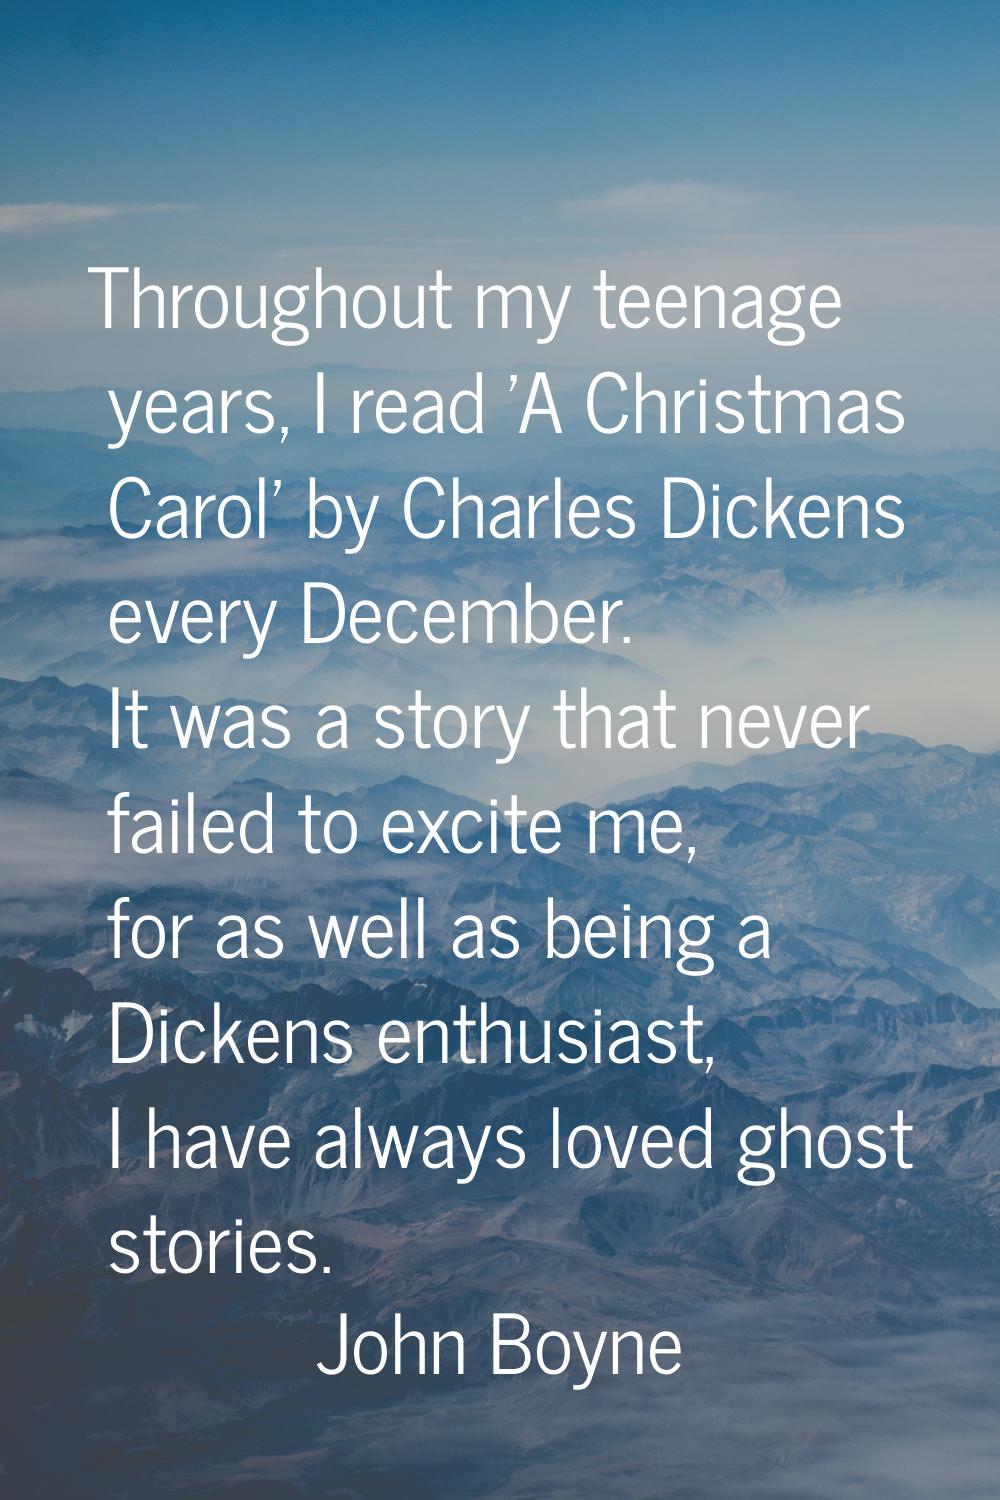 Throughout my teenage years, I read 'A Christmas Carol' by Charles Dickens every December. It was a